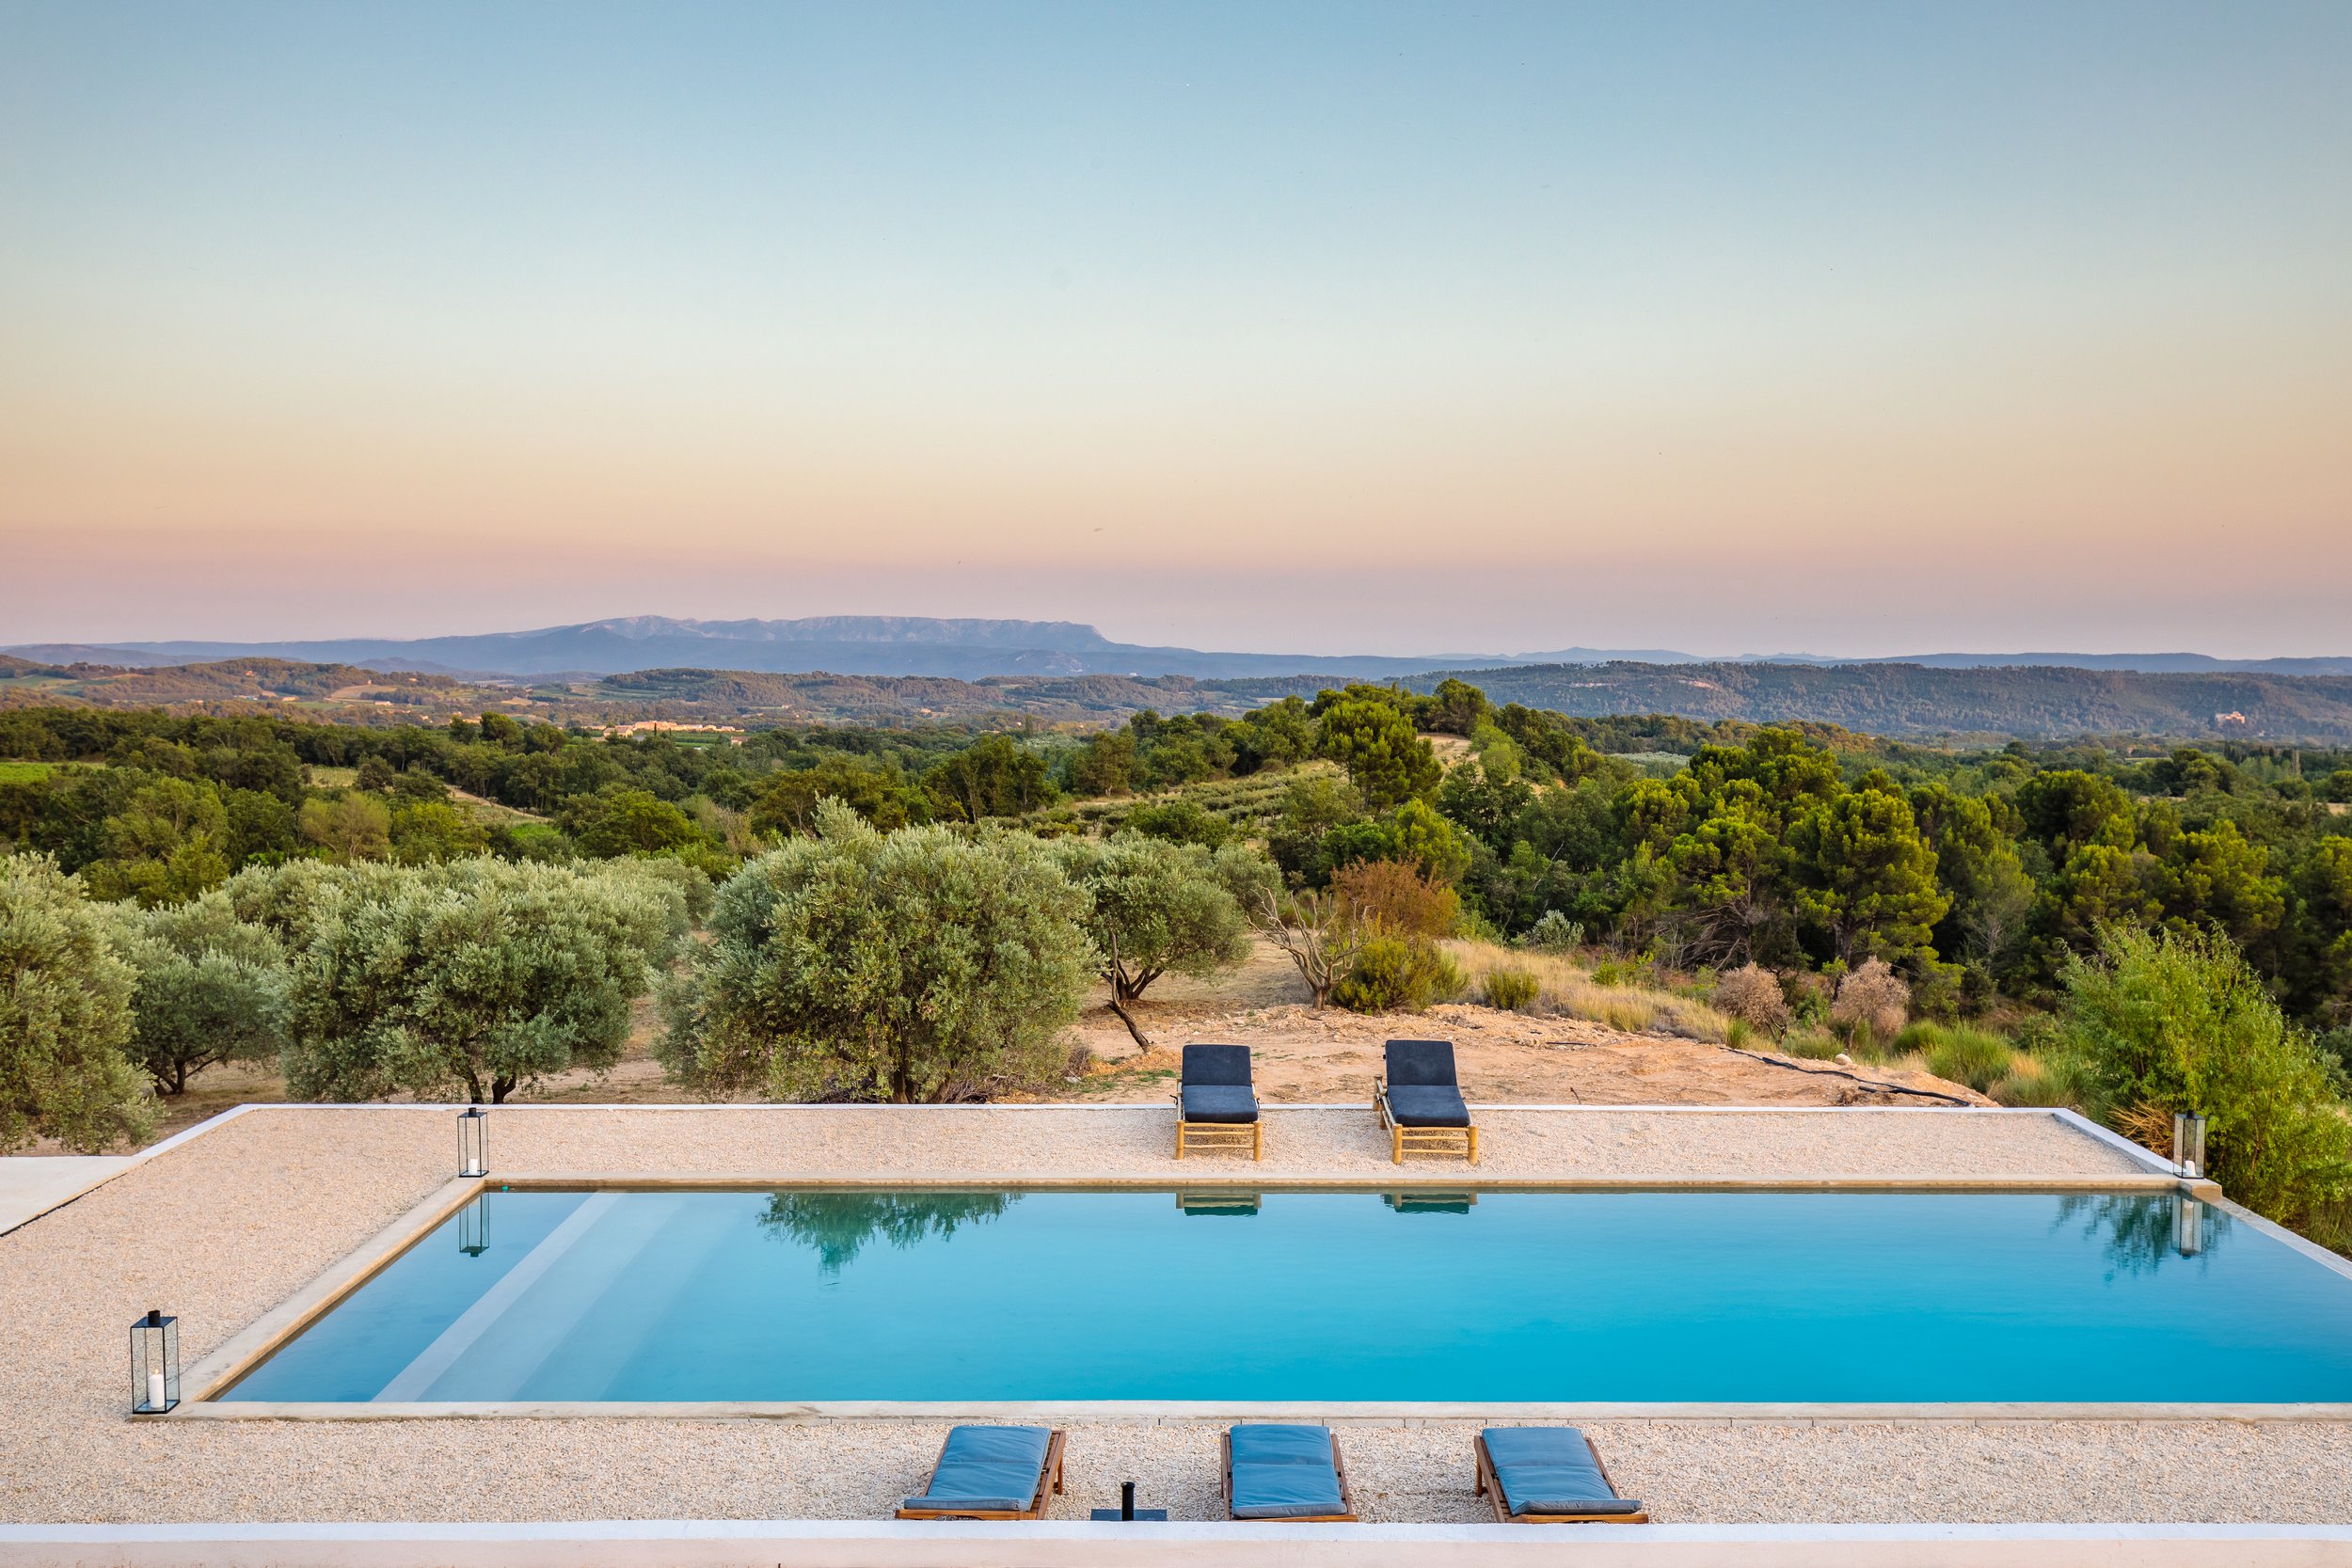 Luxury estate and exceptional château in the heart of Provence and the Luberon region